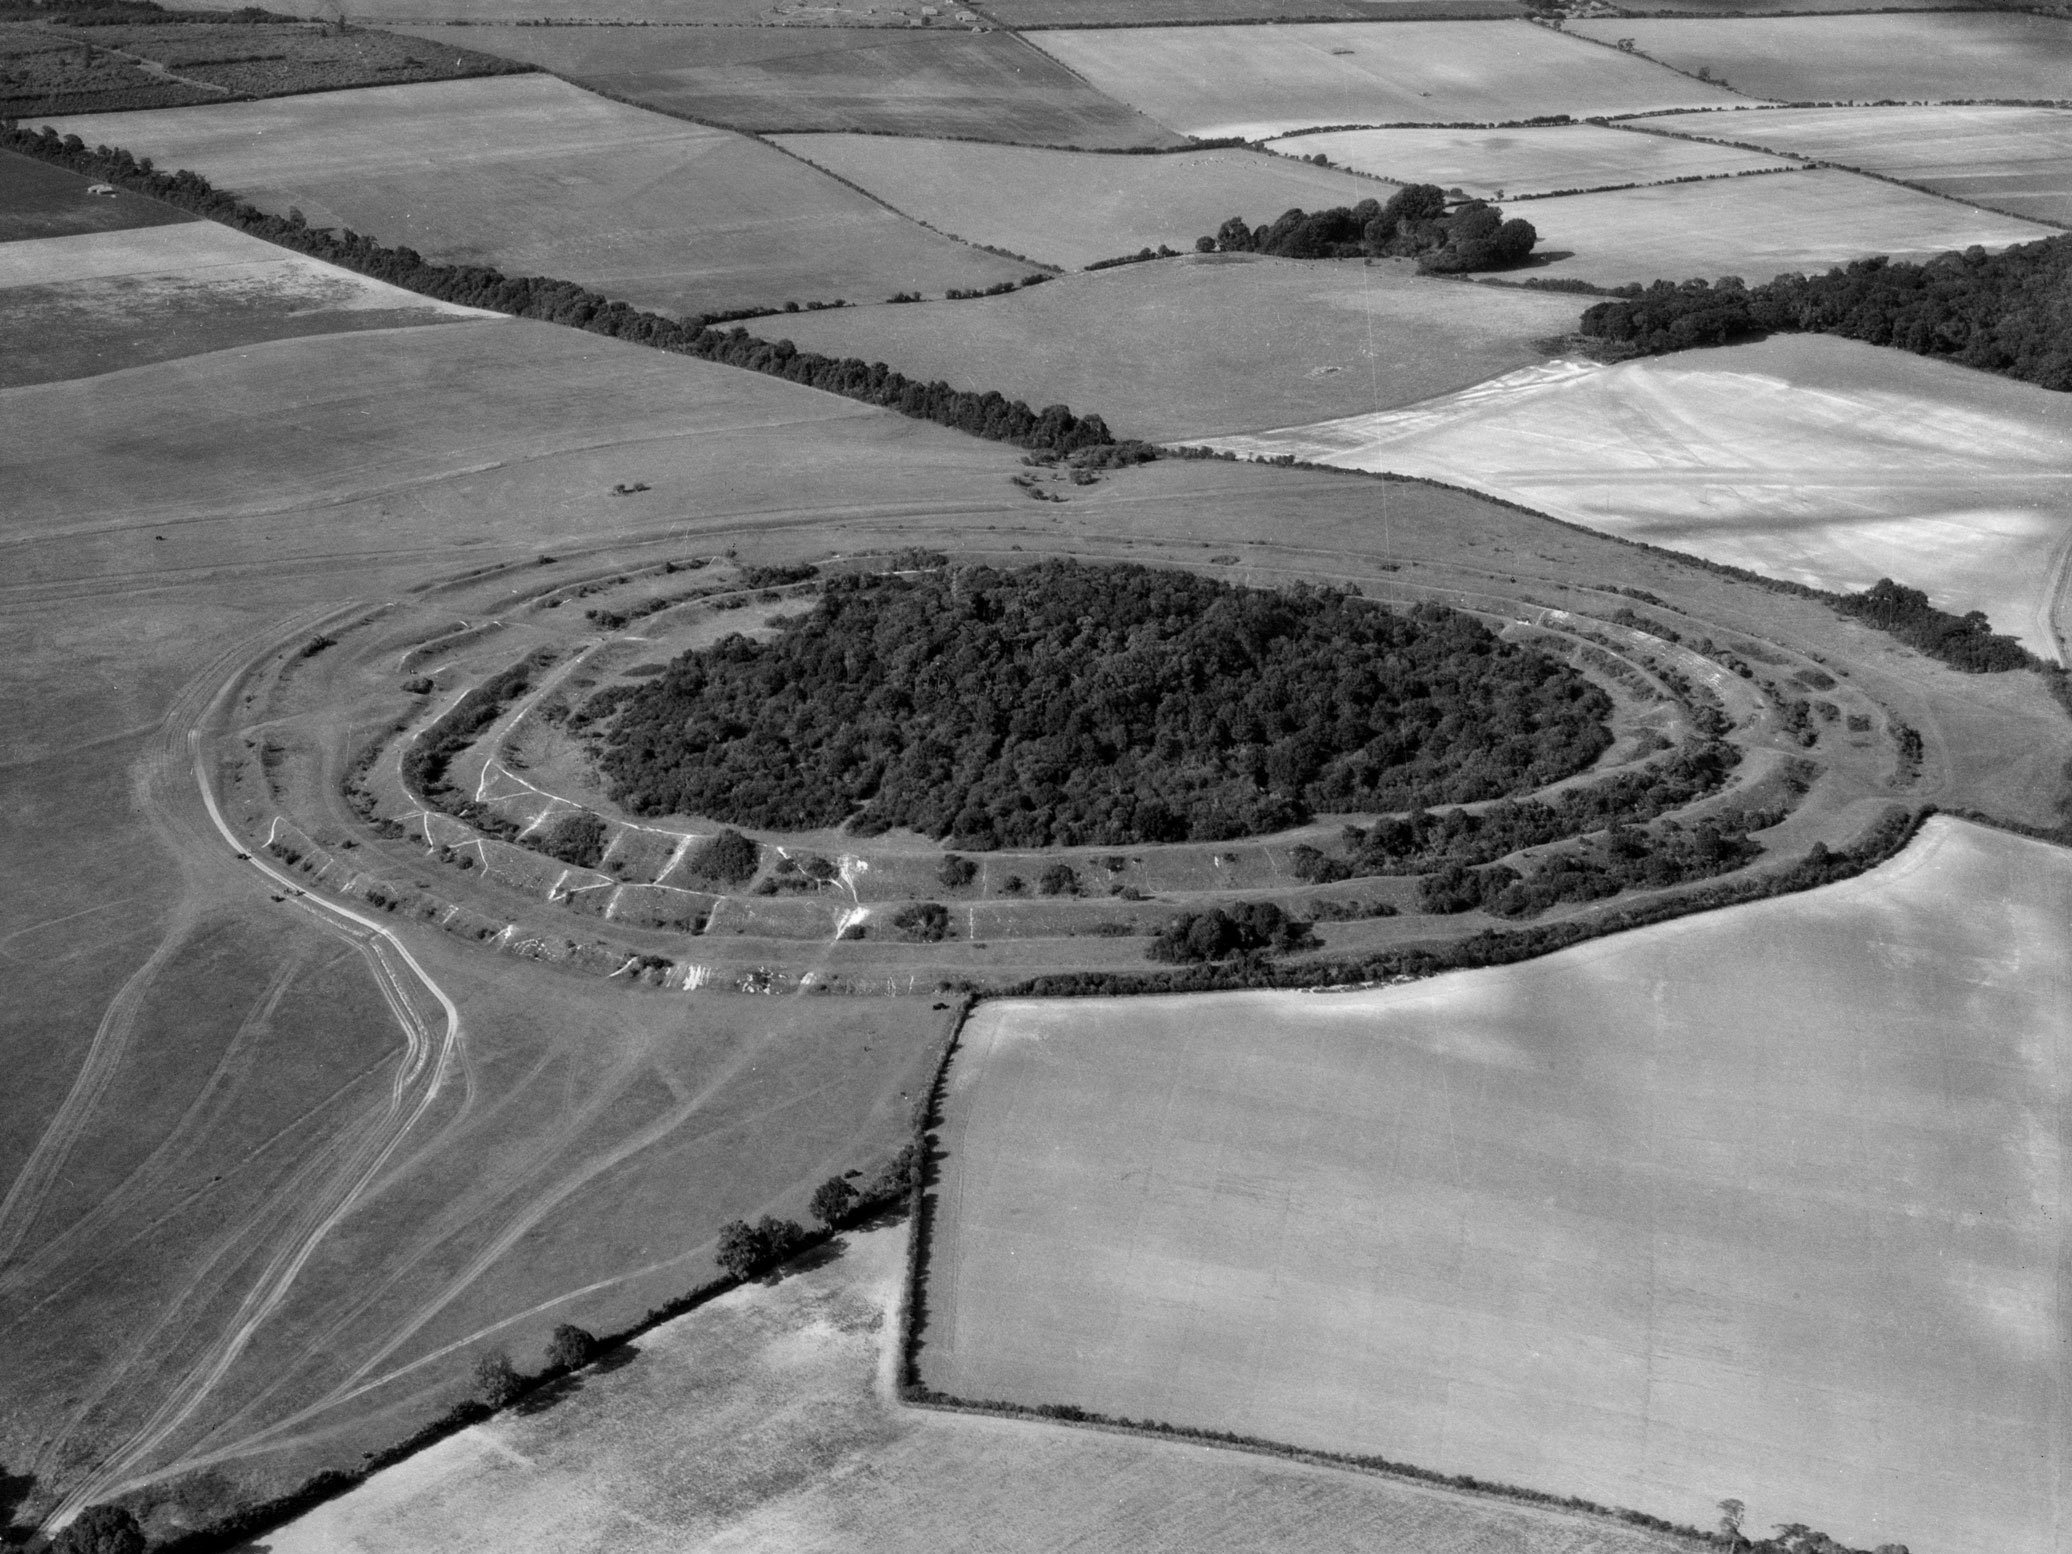 A black and white aerial photograph showing a hill fort with multiple banks and ditches: the interior is wooded.